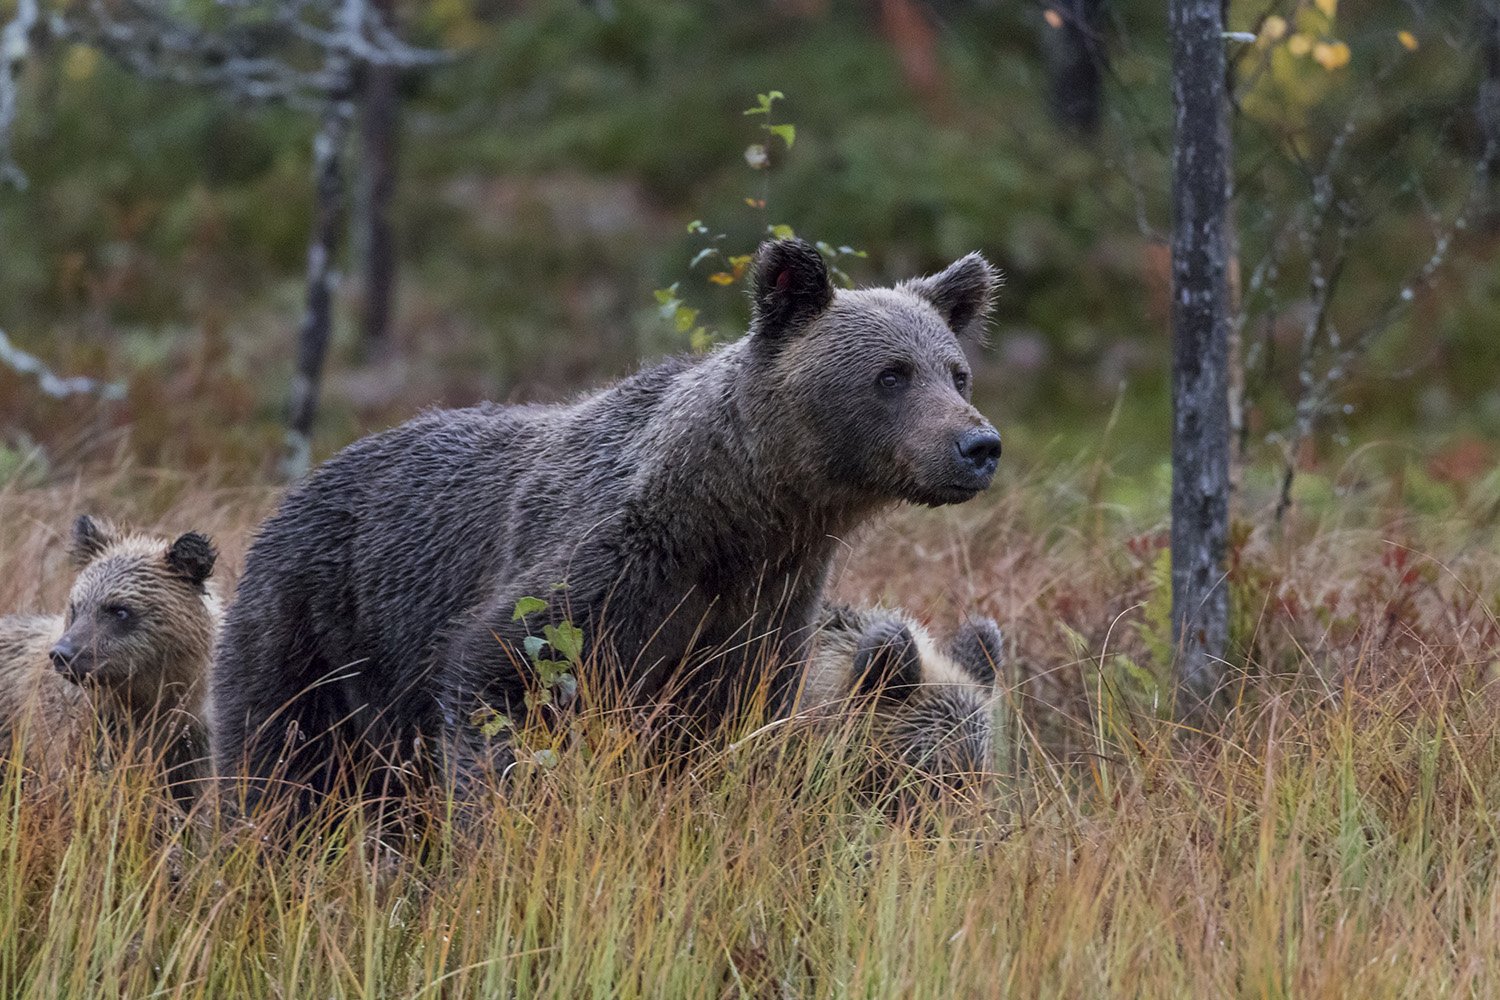 Wild bear with cubs in Kuhmo, Finland